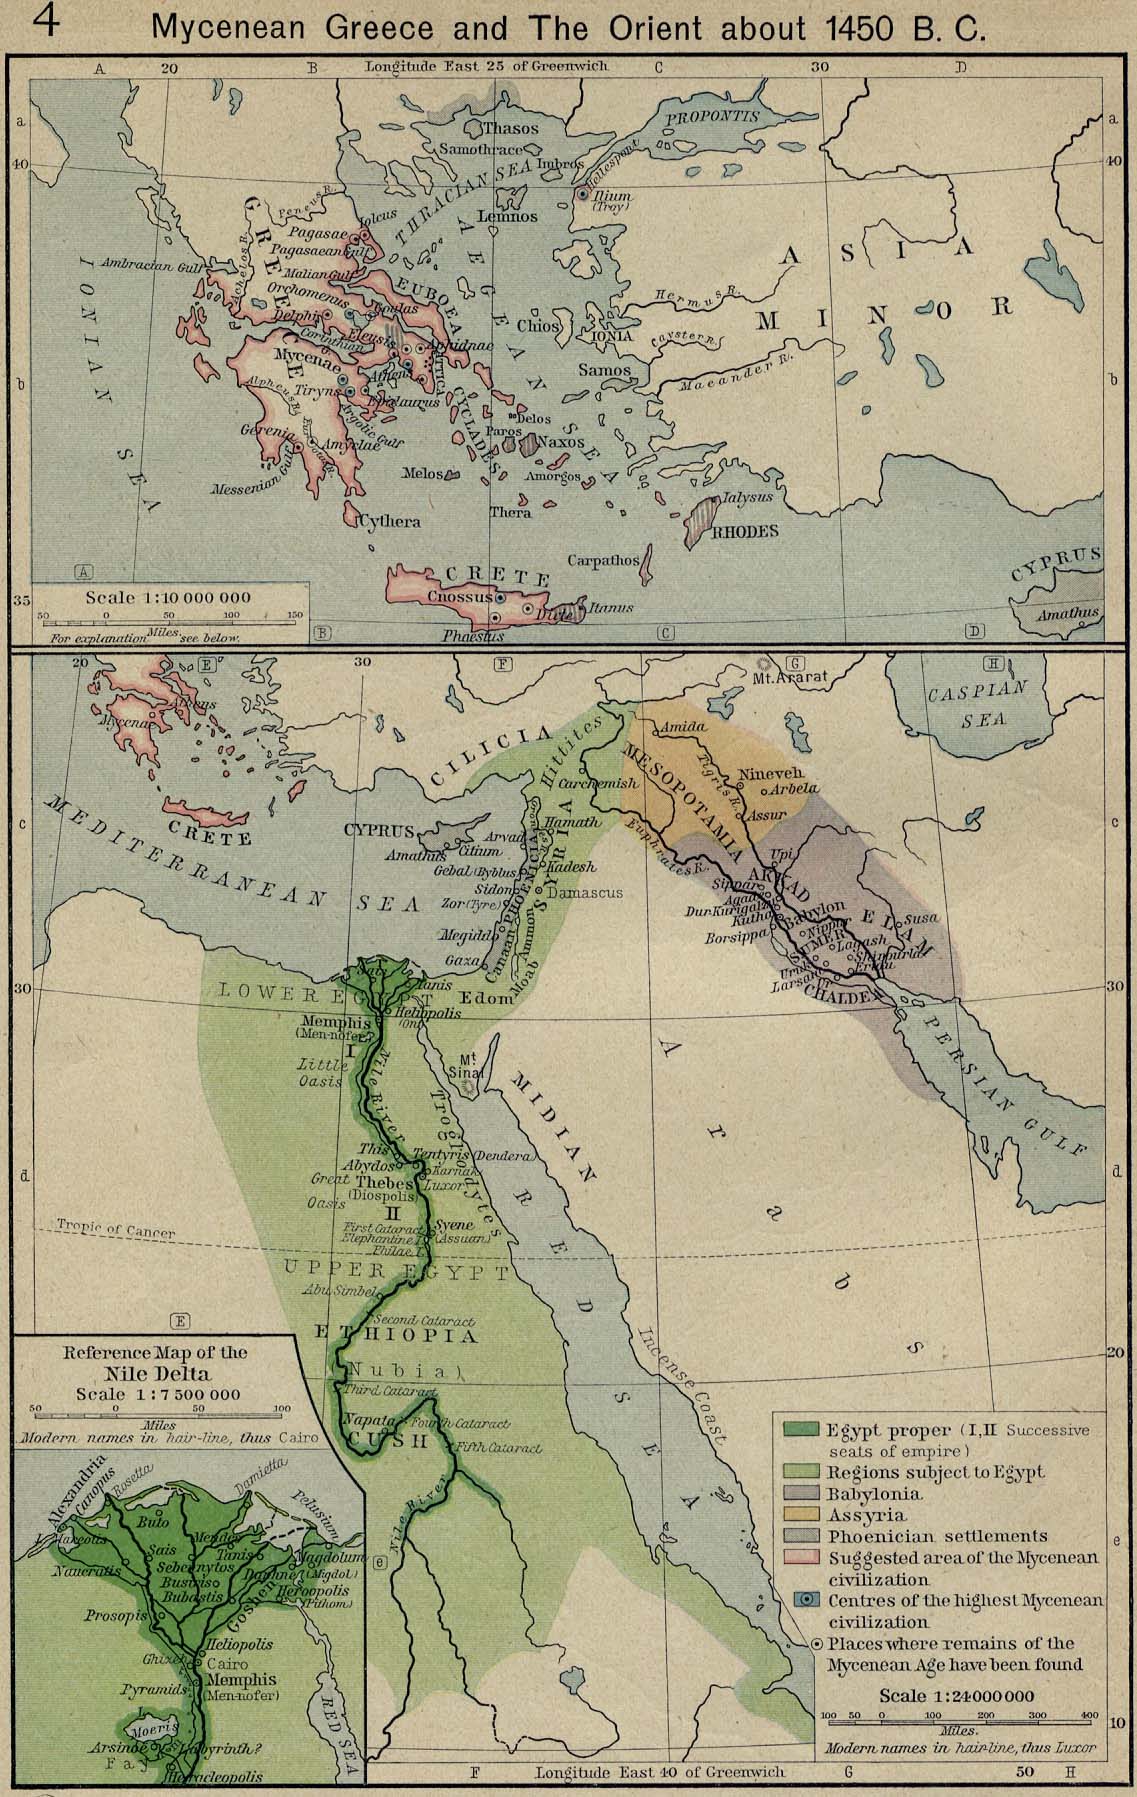 Map of Mycenaean Greece and the Orient about 1450 B.C.